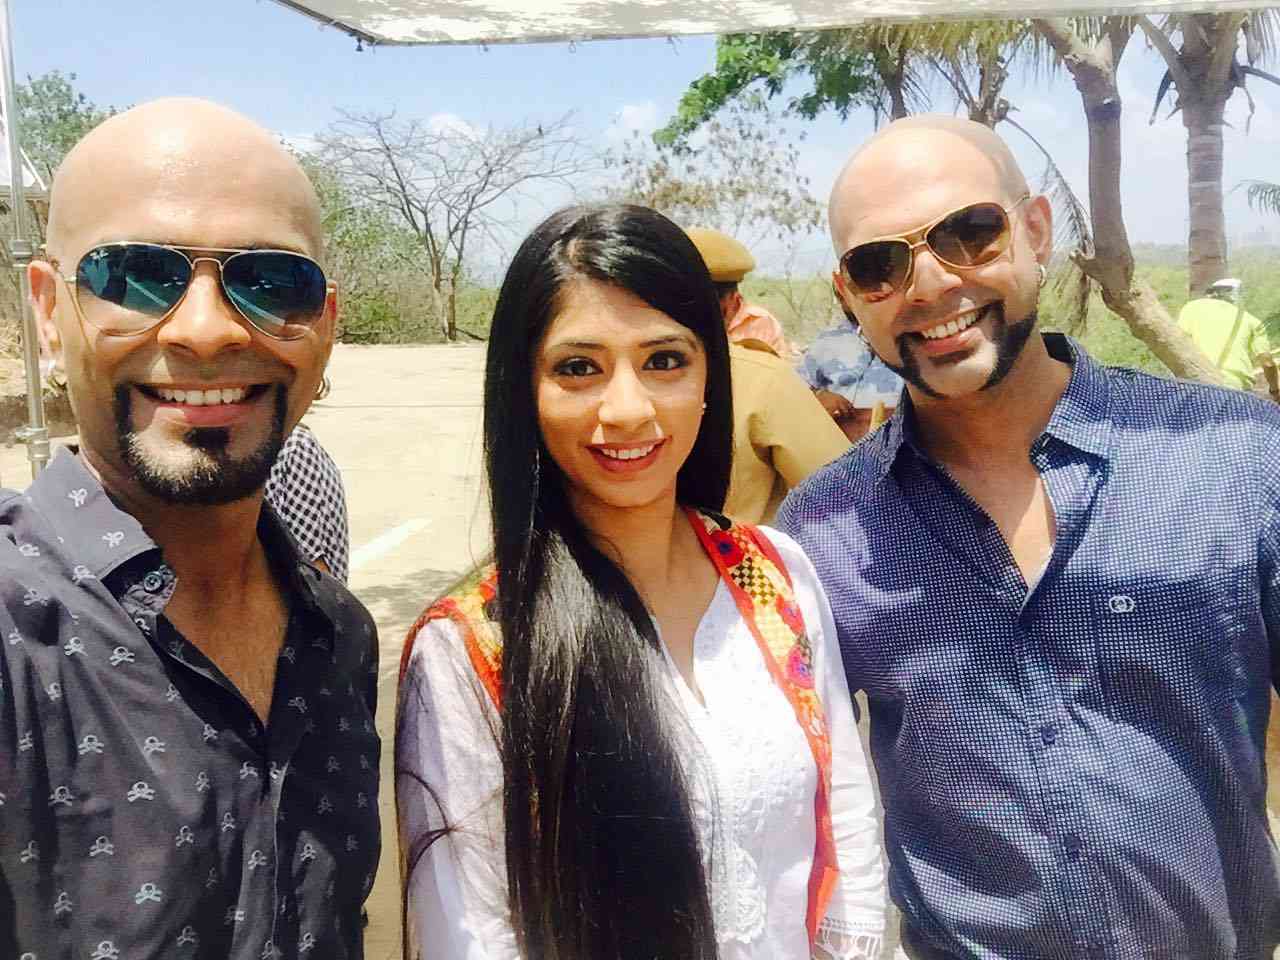 Snehal Rai (center) with Raghu and Rajeev during the shoot of MTV Roadies